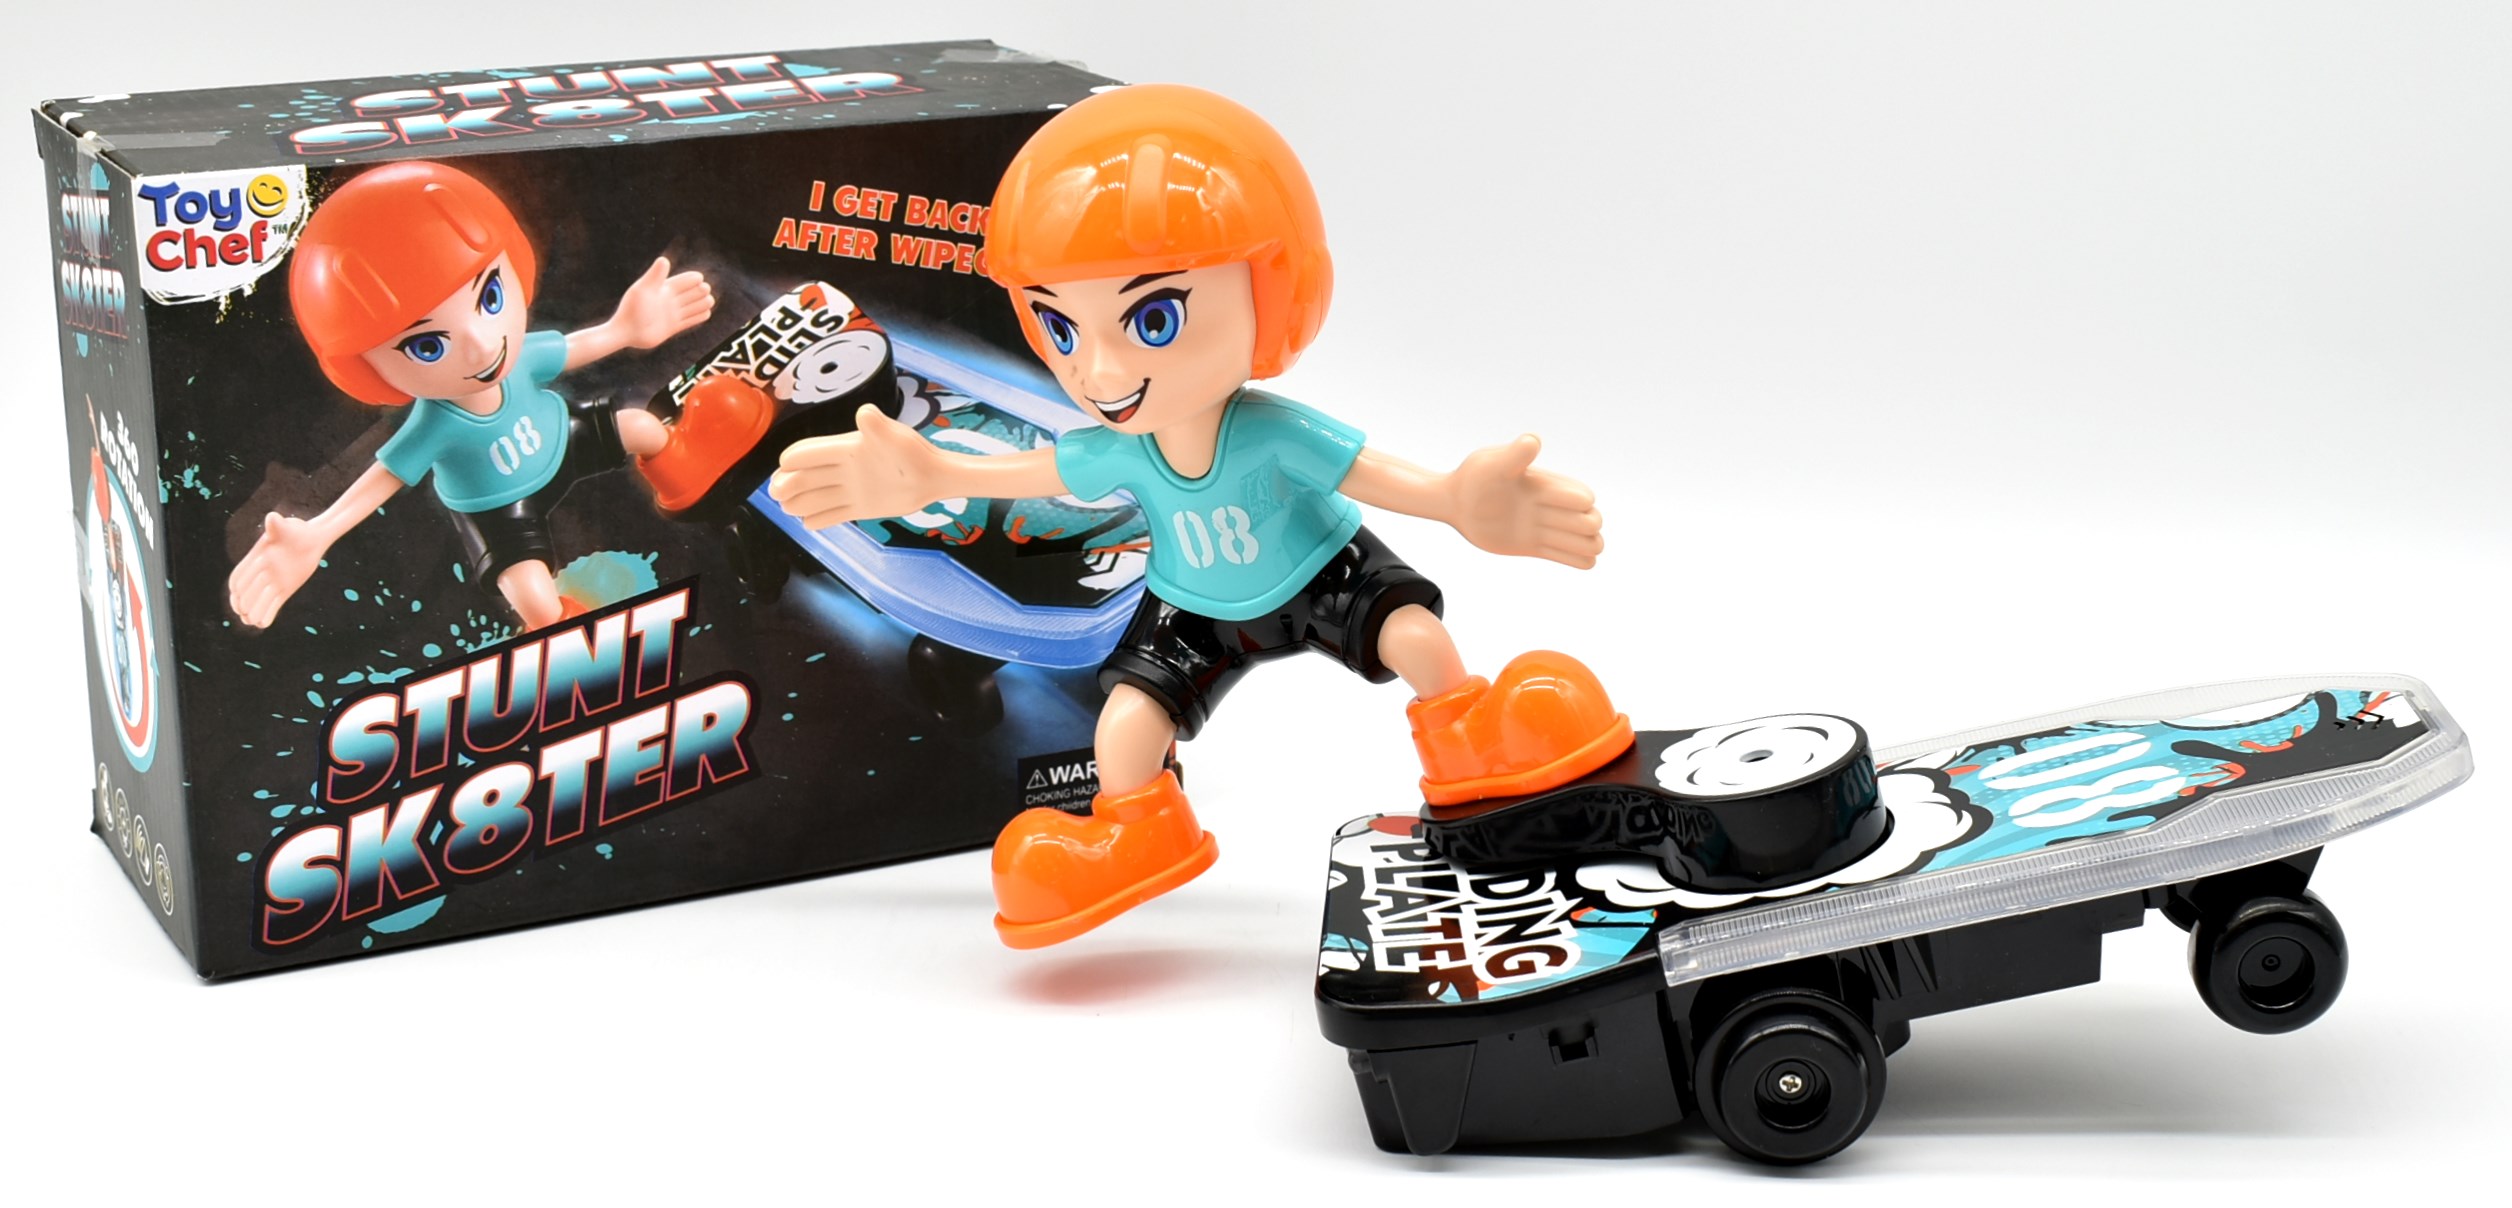 TOY,  STUNT SKATER,  LIGHTS UP BATTERIES NOT INCLUDED